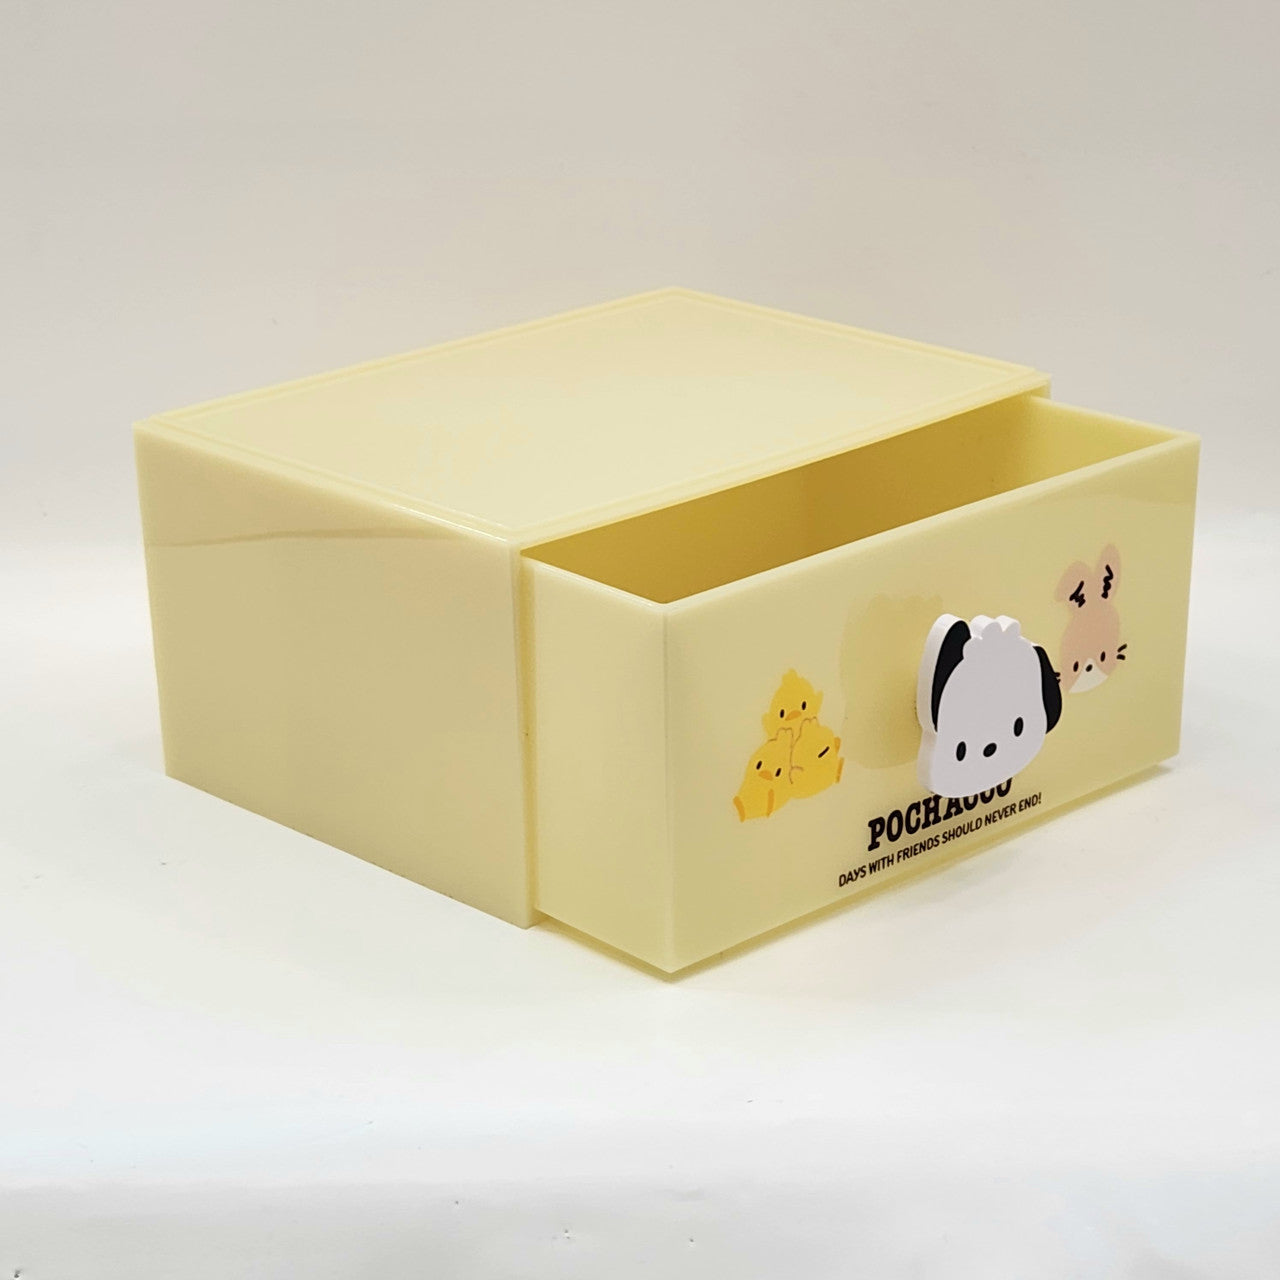 Sanrio Stacking Chest